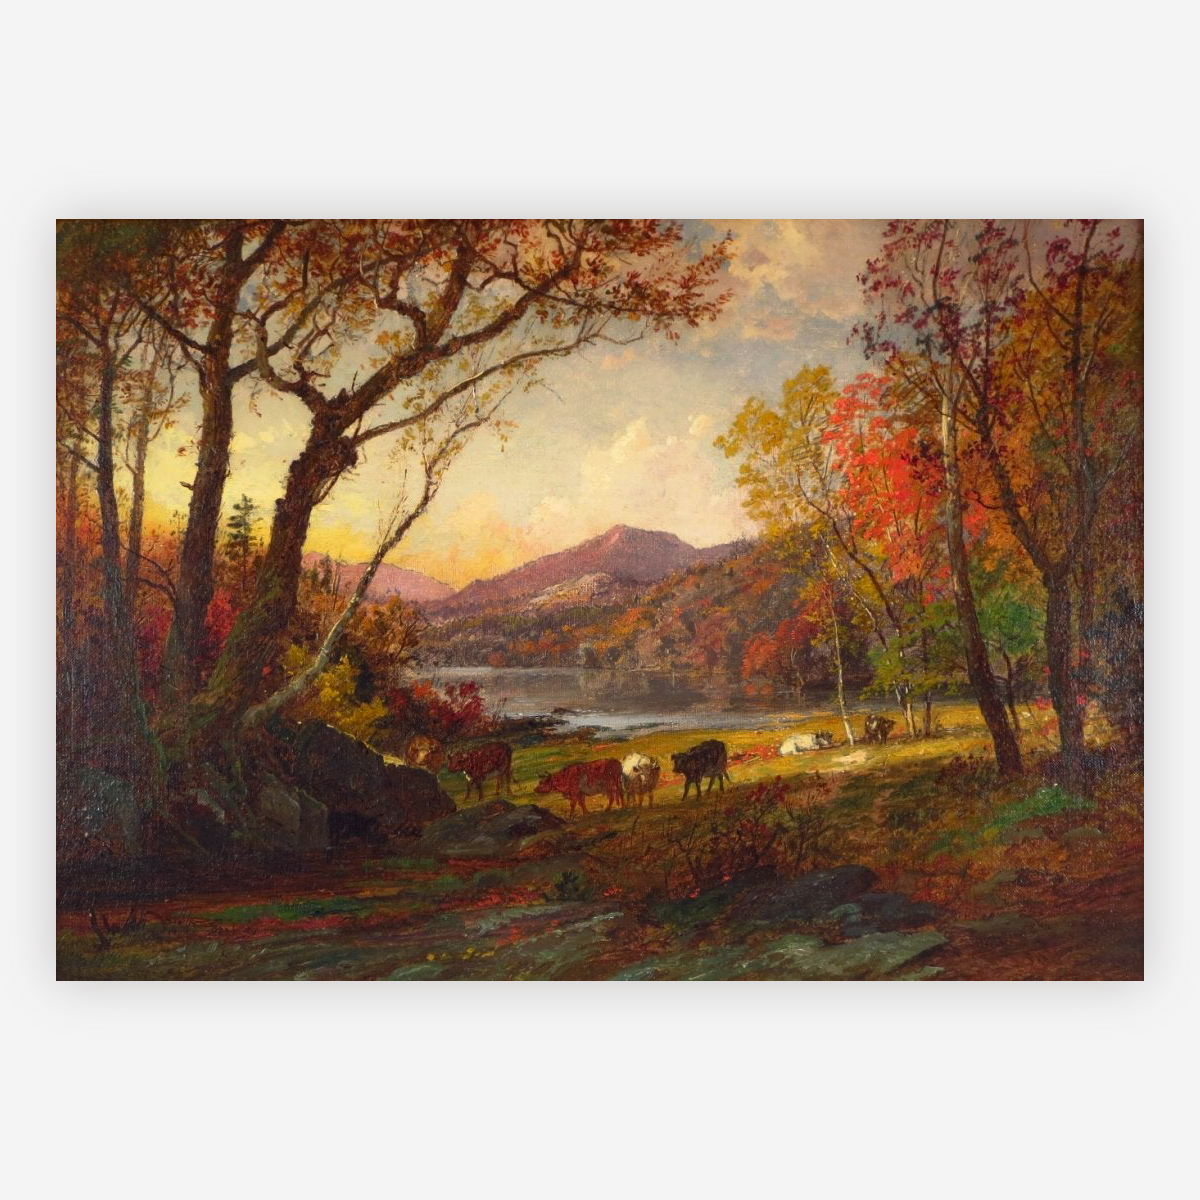 Autumn Landscape with Lake, Mountains and Cattle